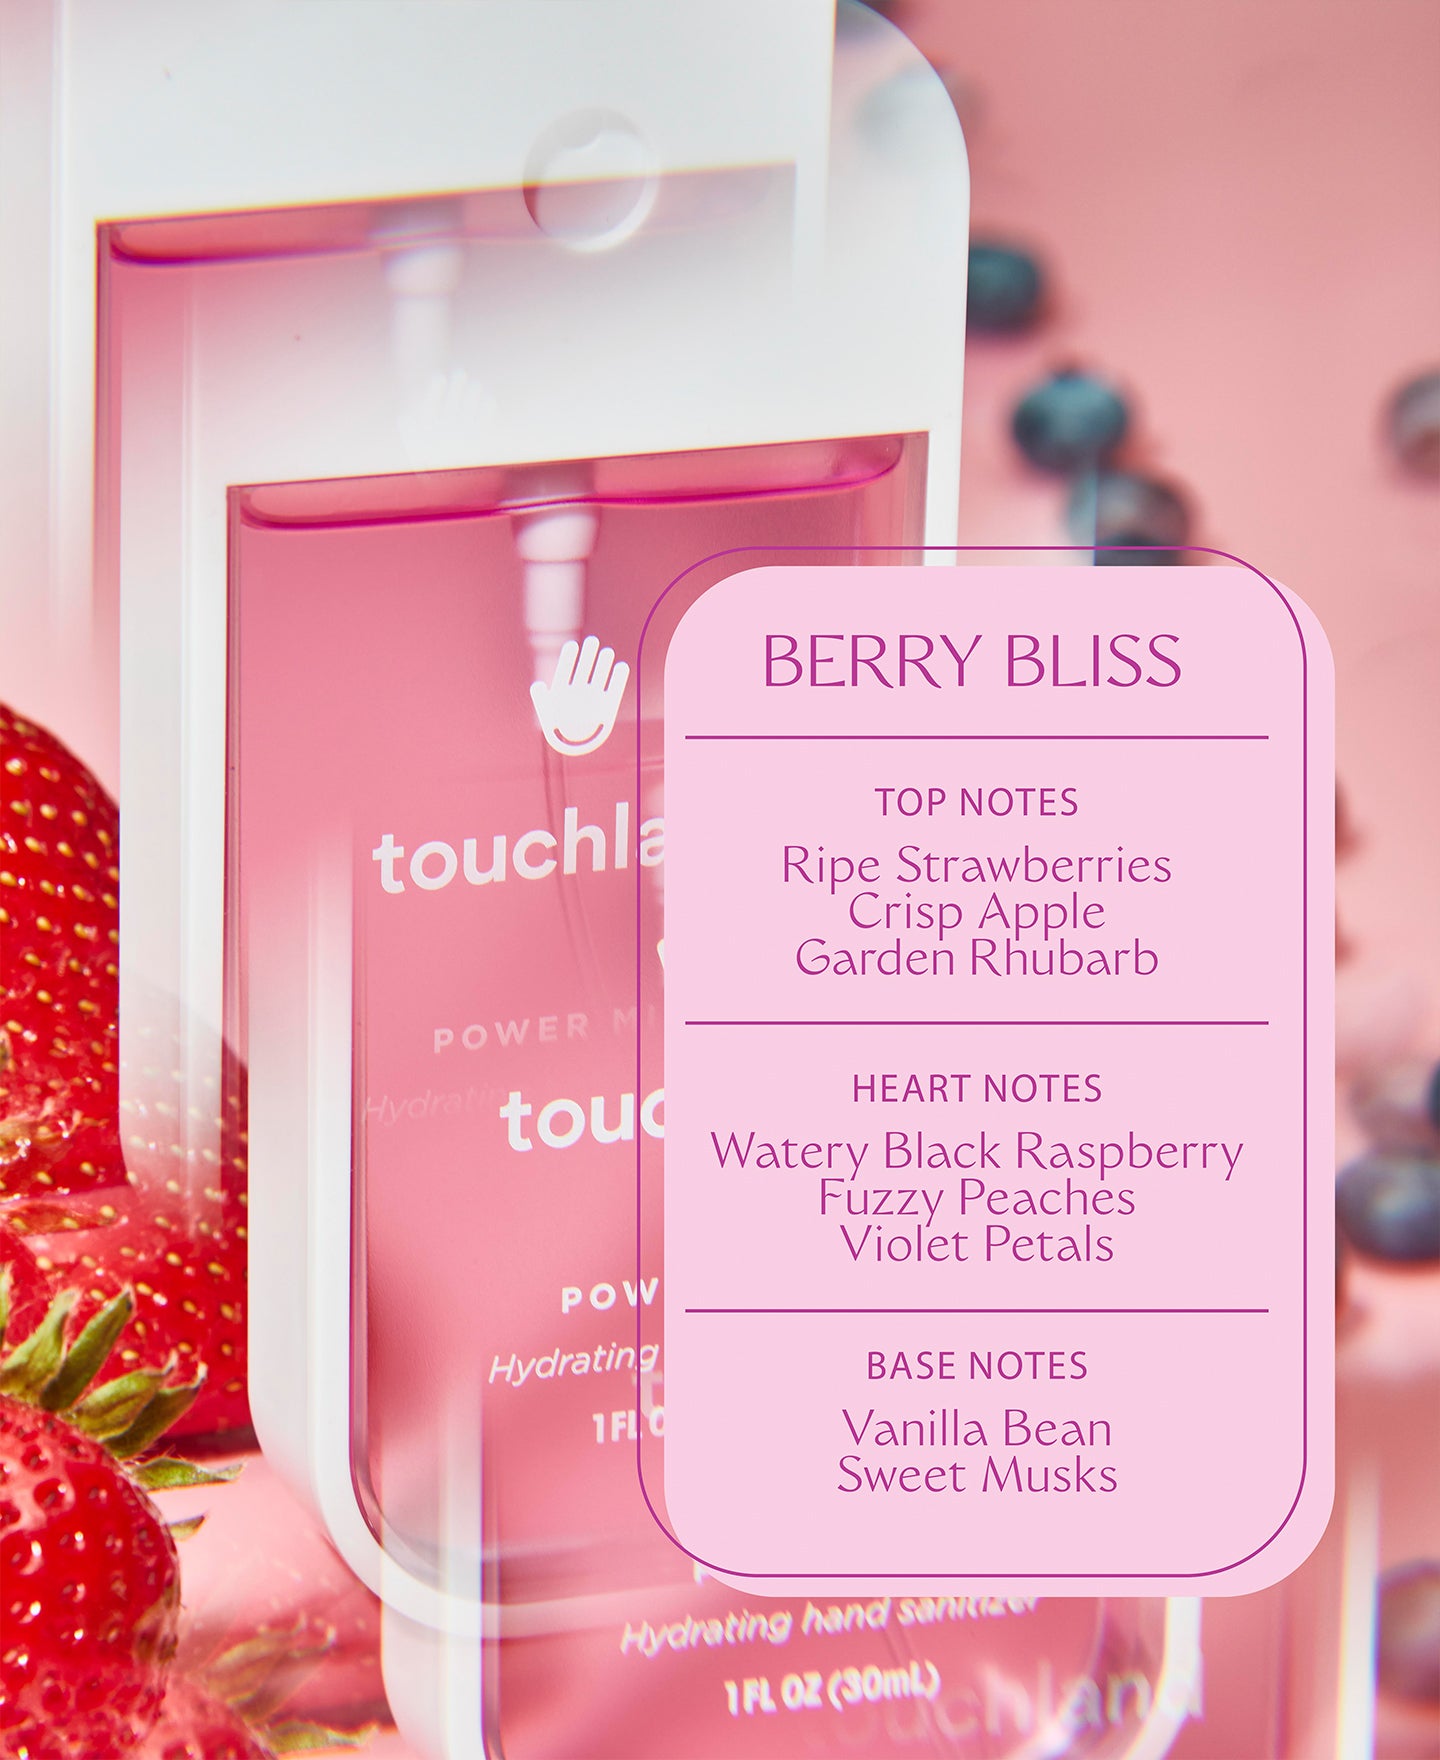 Berry bliss power mist key ingredients list on pink background